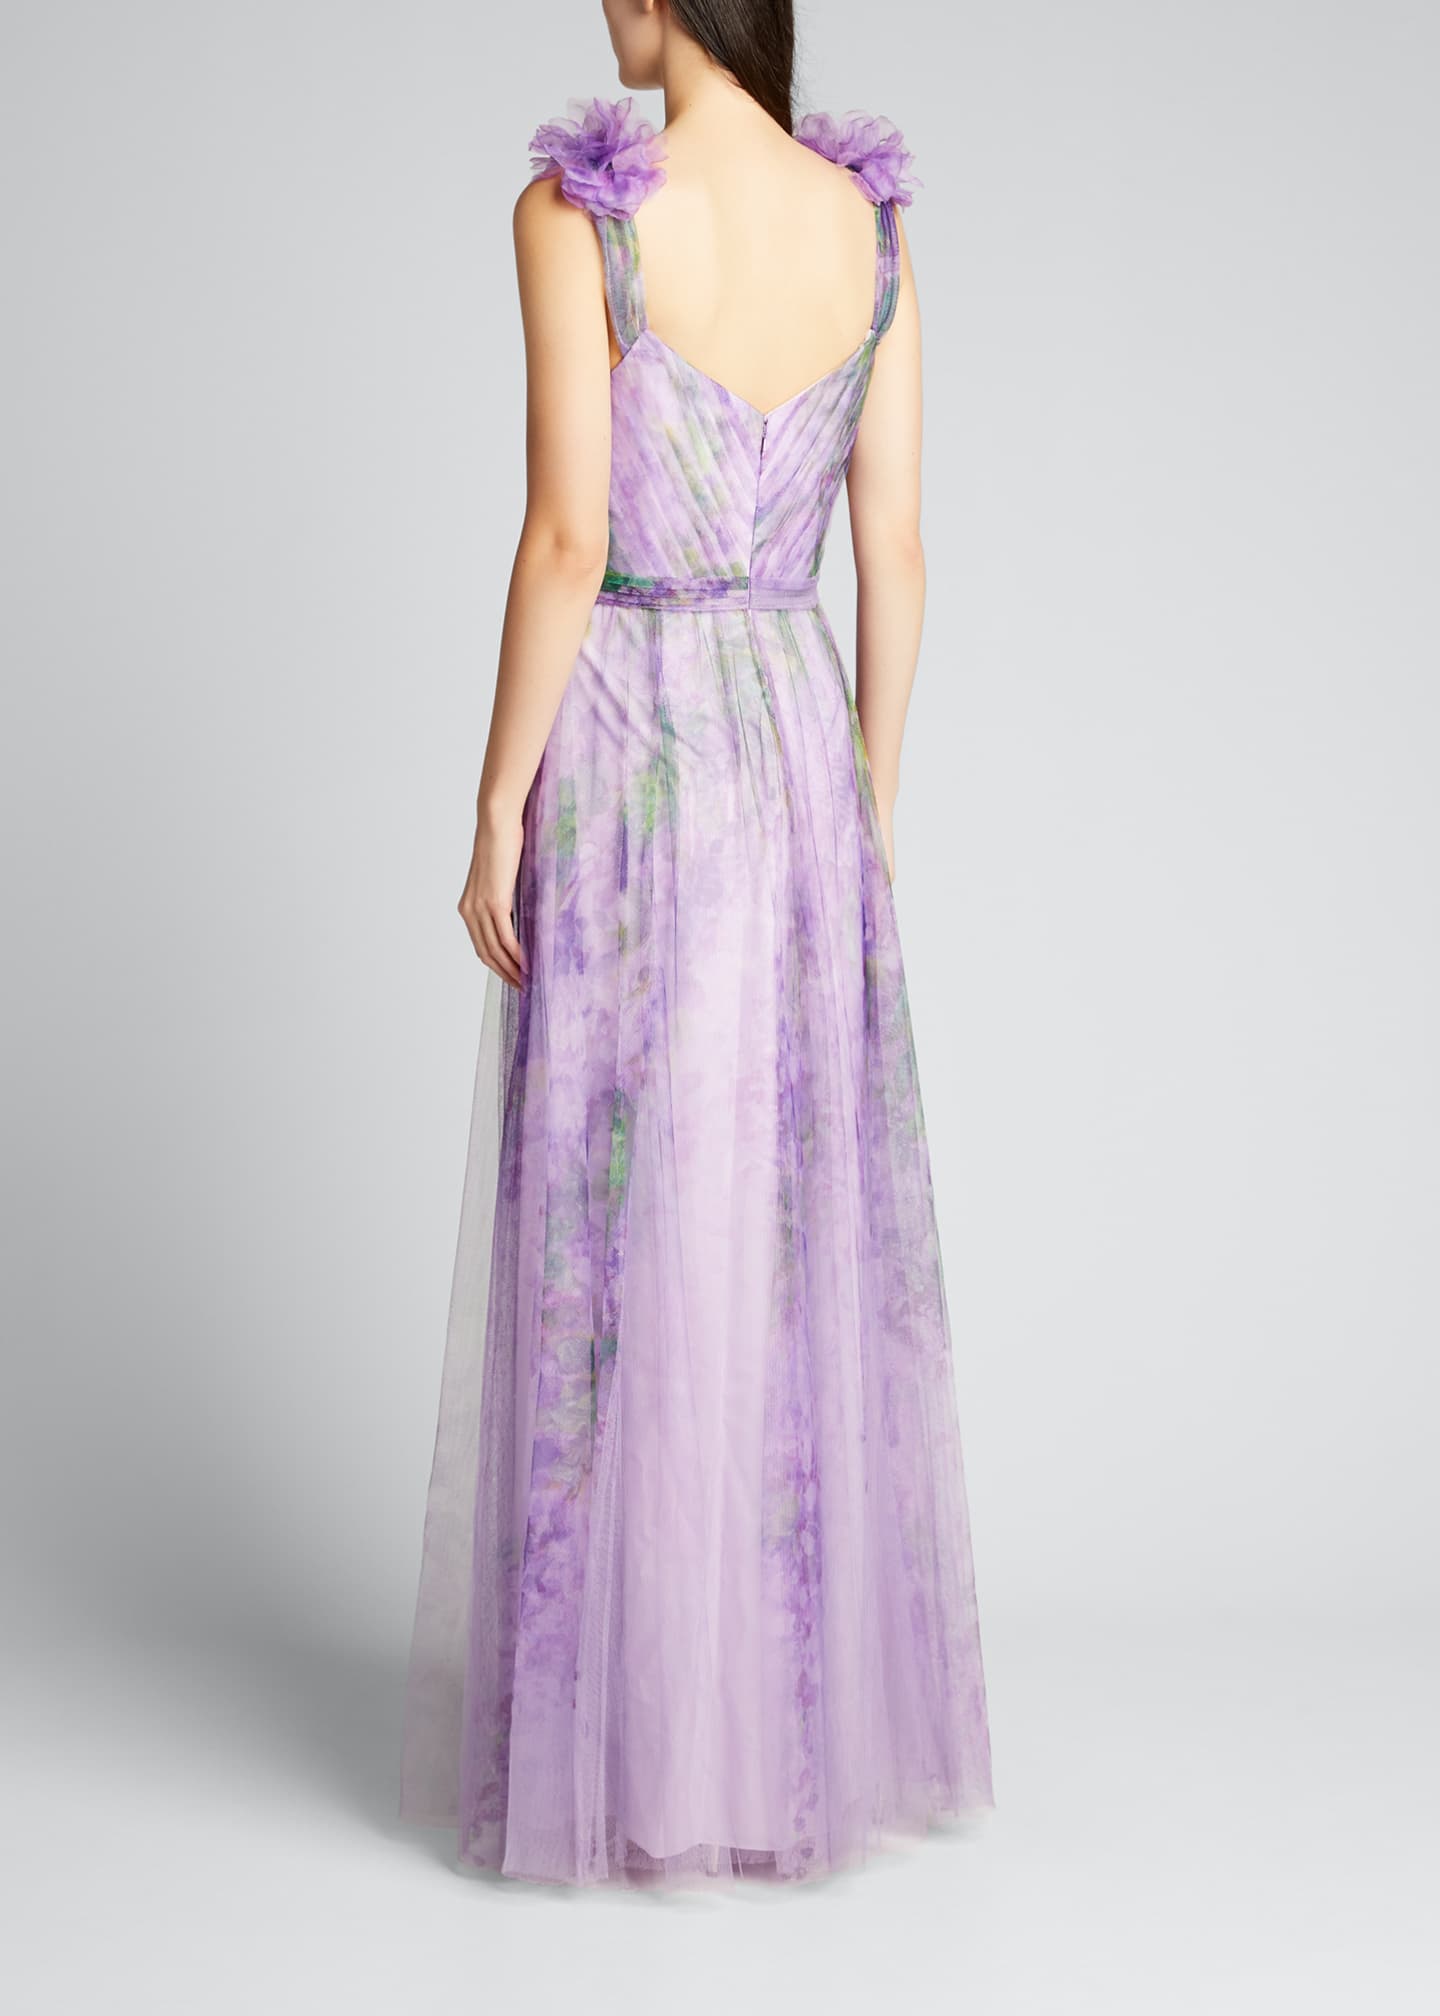 Marchesa Notte Watercolor Printed Tulle Gown with Draped Bodice ...